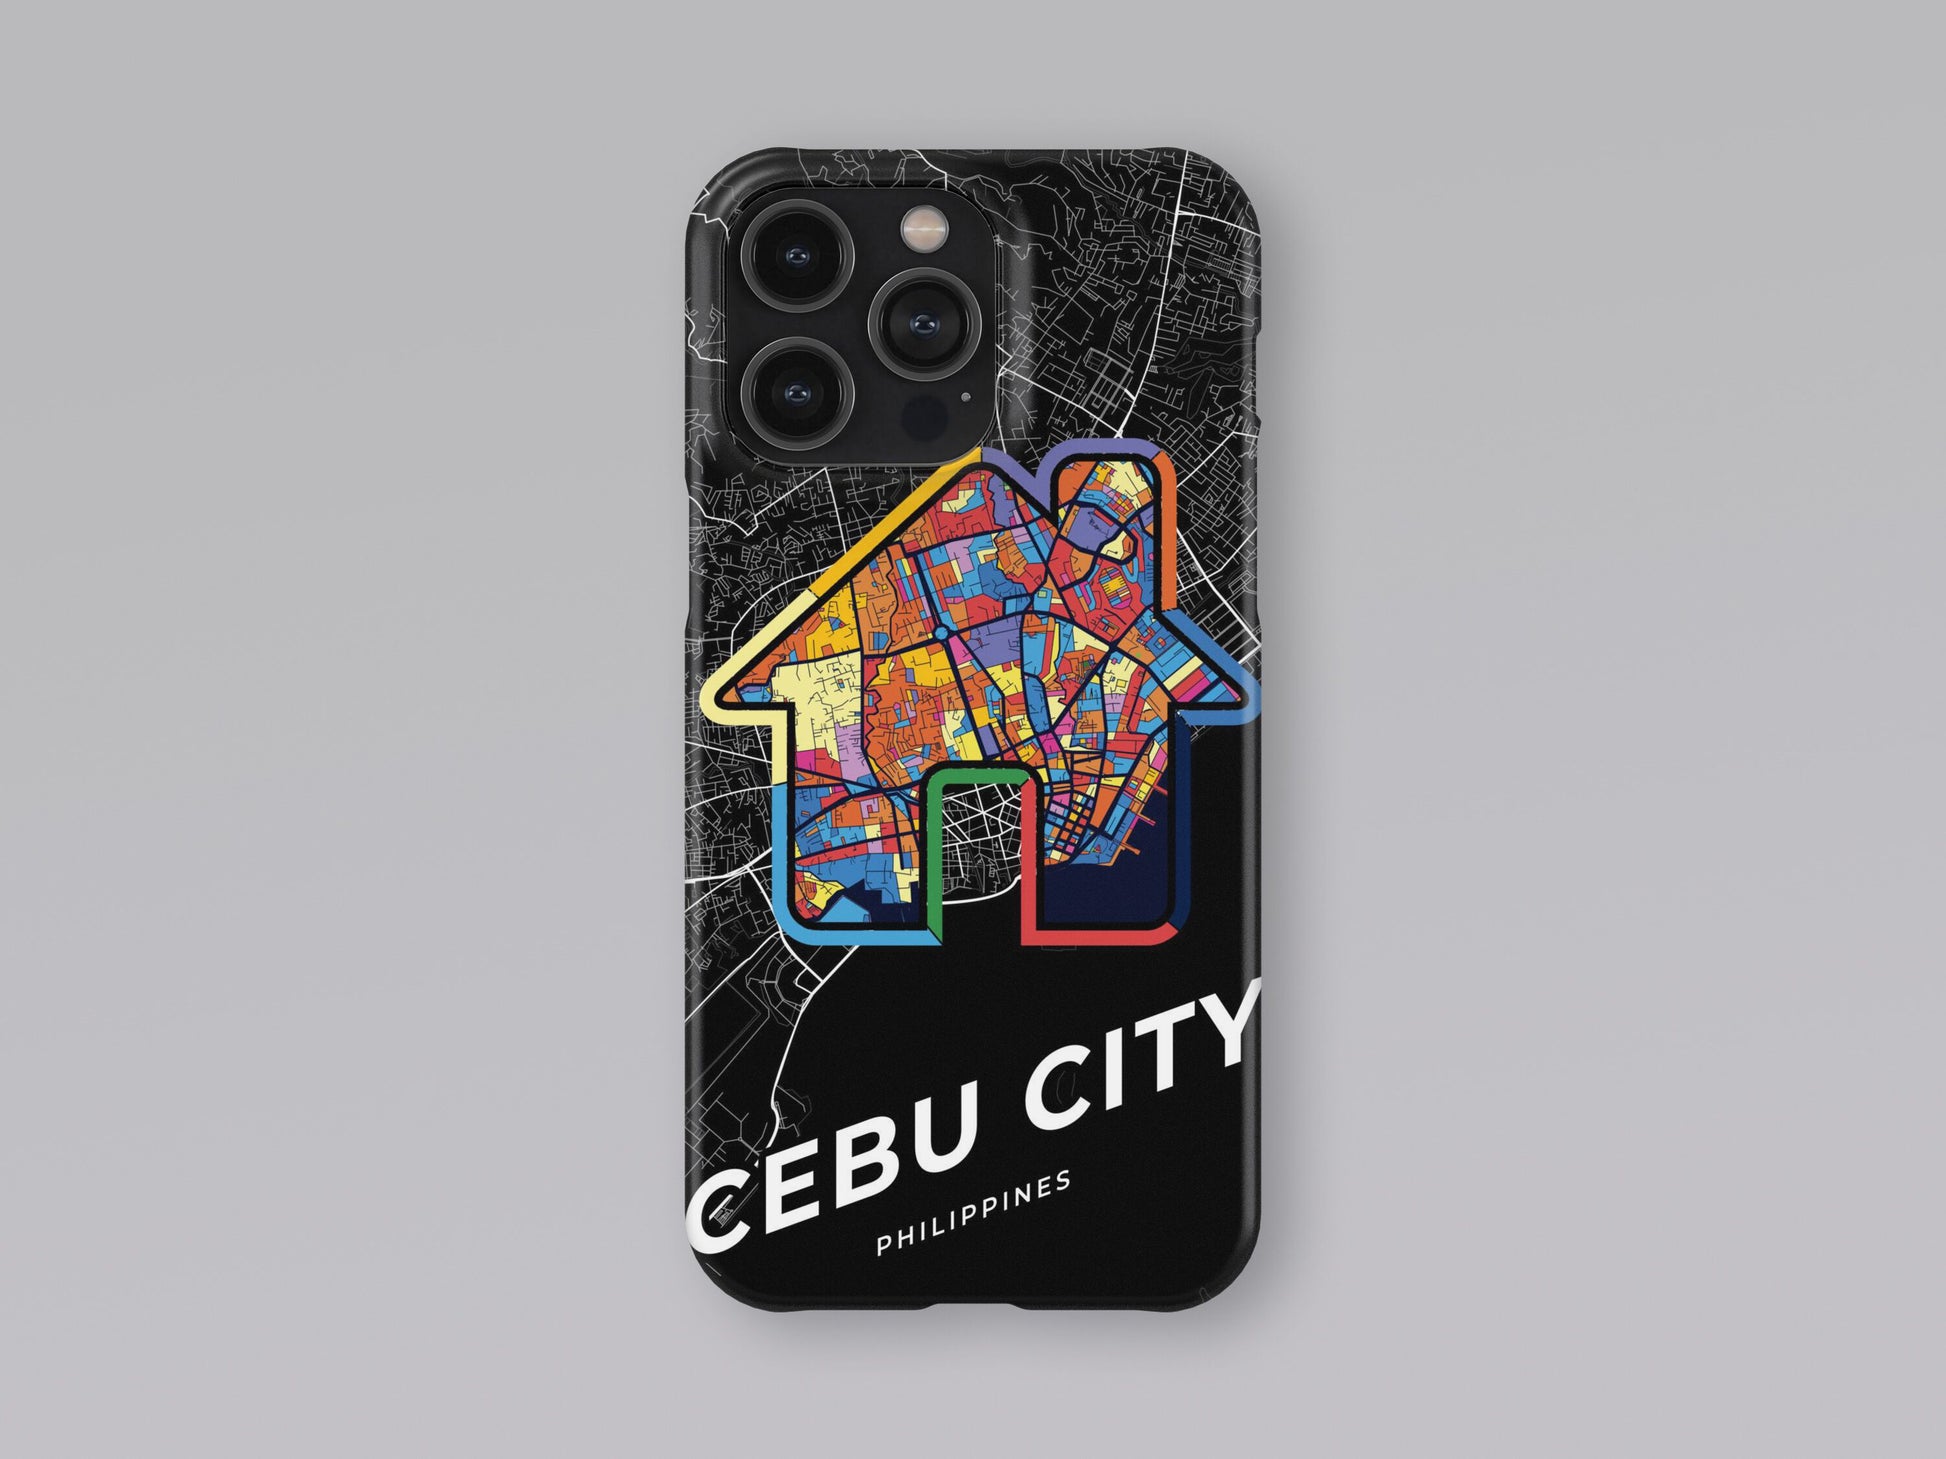 Cebu City Philippines slim phone case with colorful icon. Birthday, wedding or housewarming gift. Couple match cases. 3